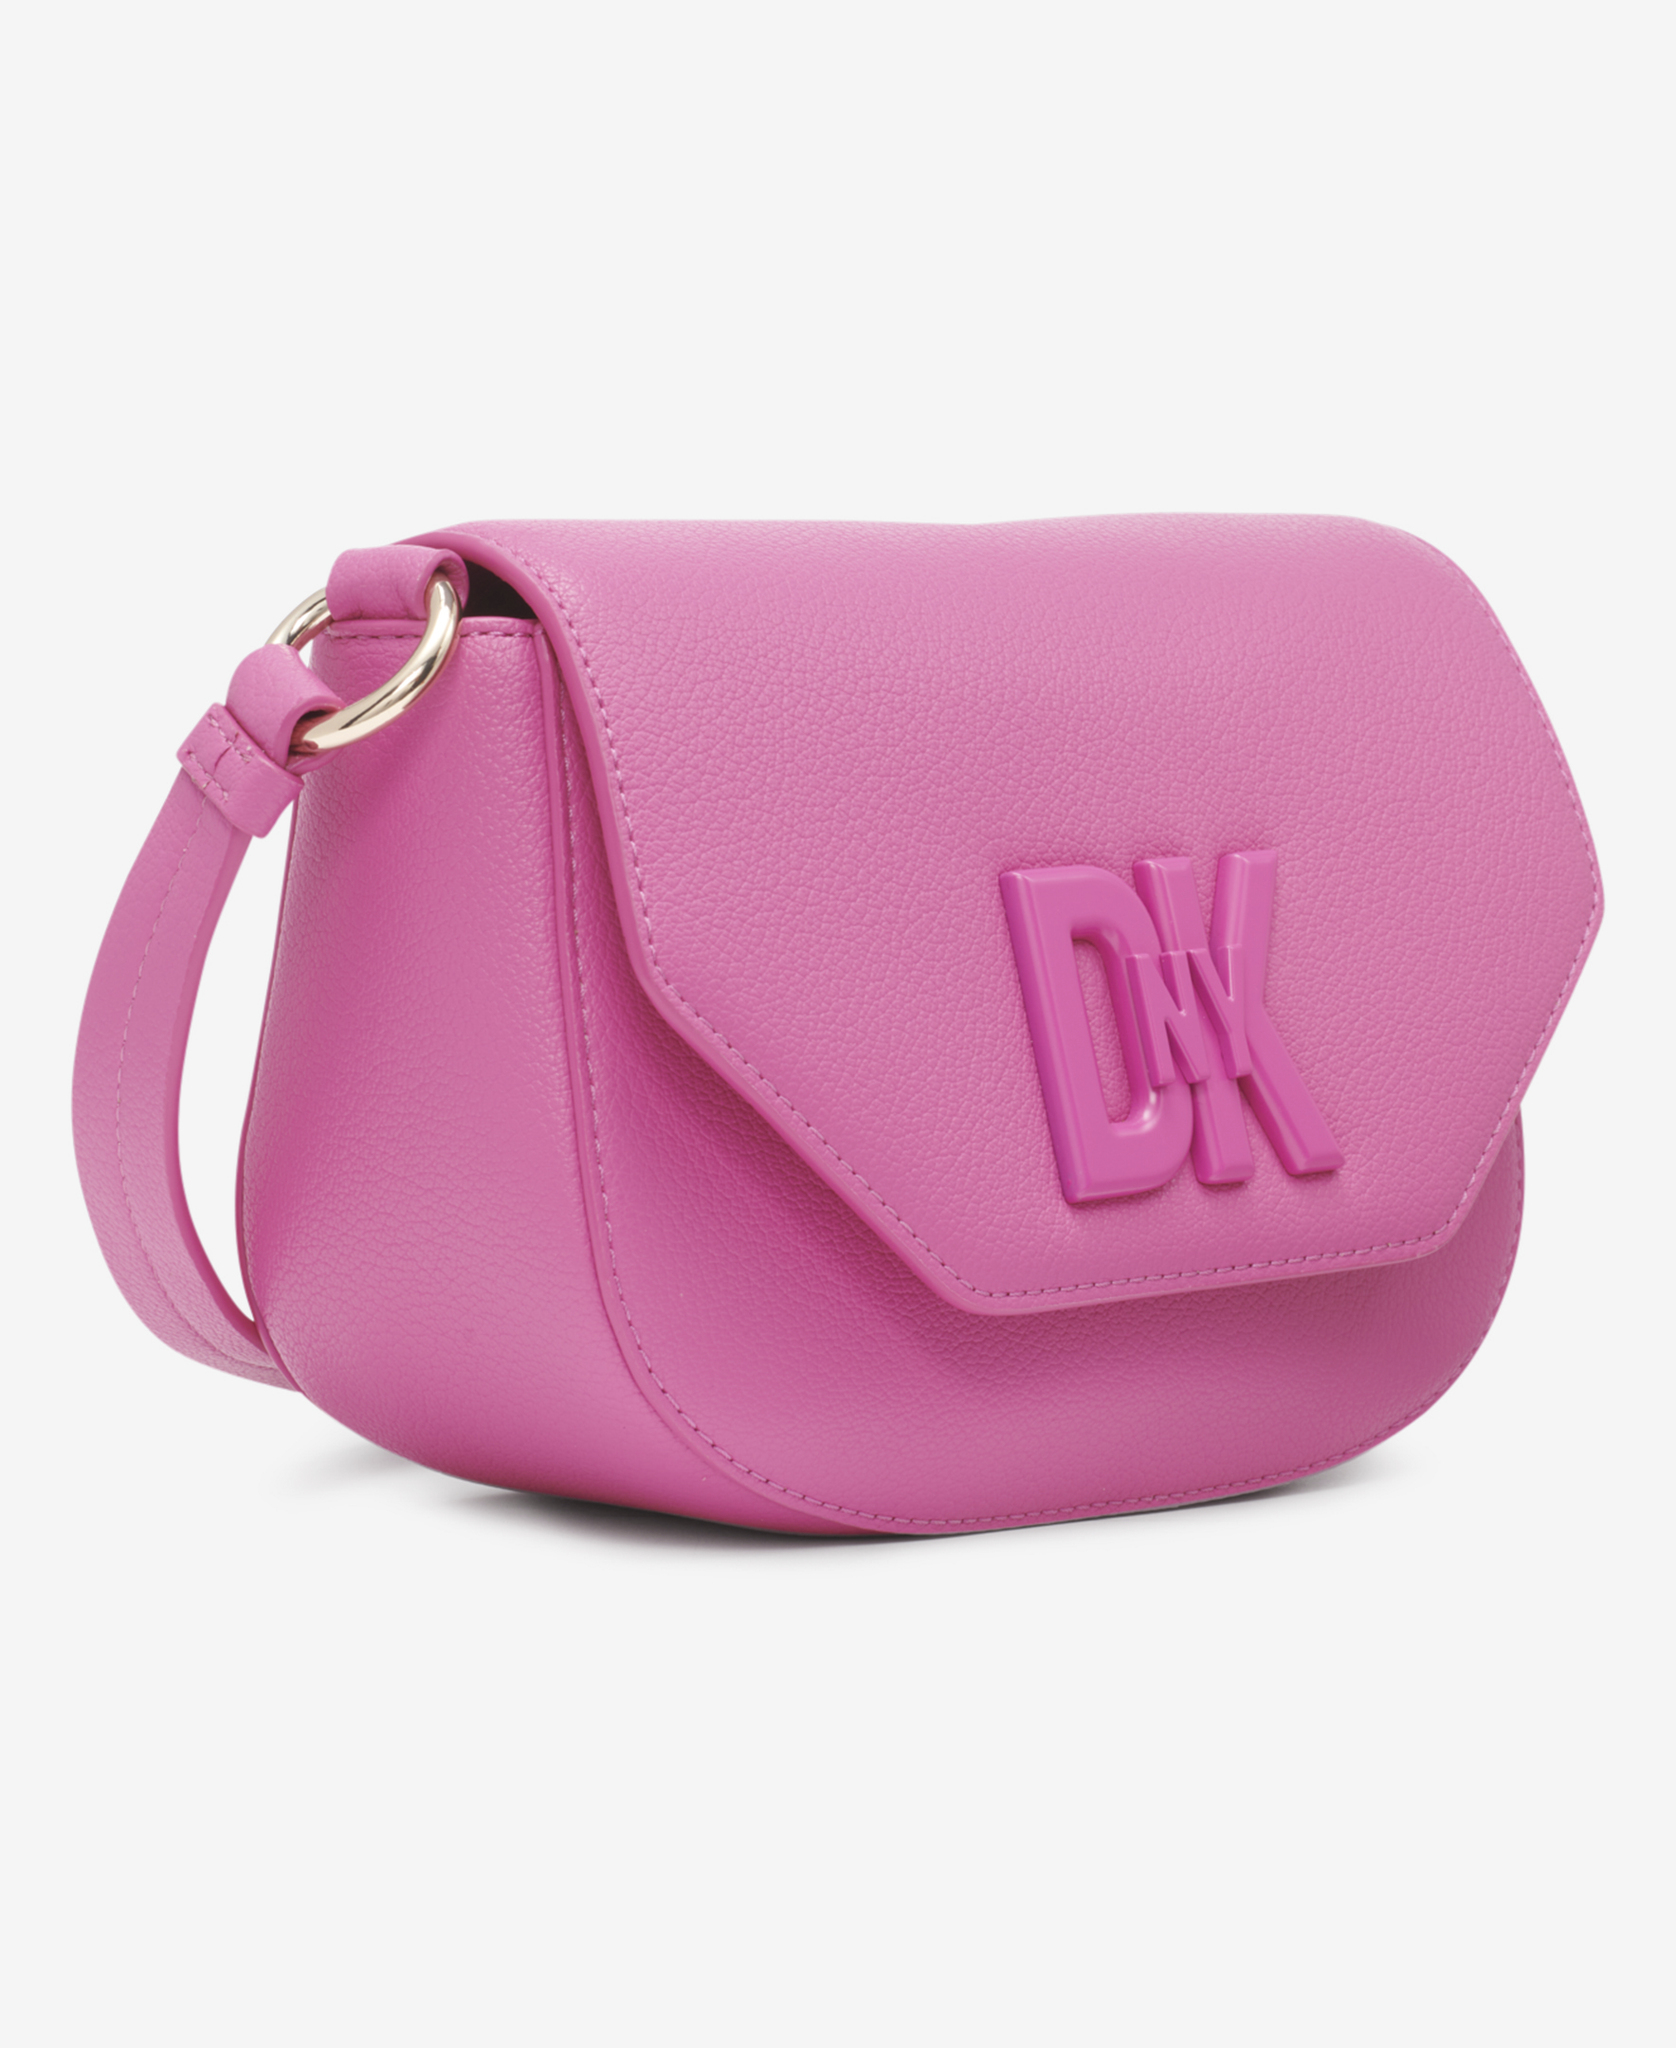 DKNY Seventh Avenue Small Flap Crossbody in Bright Pink